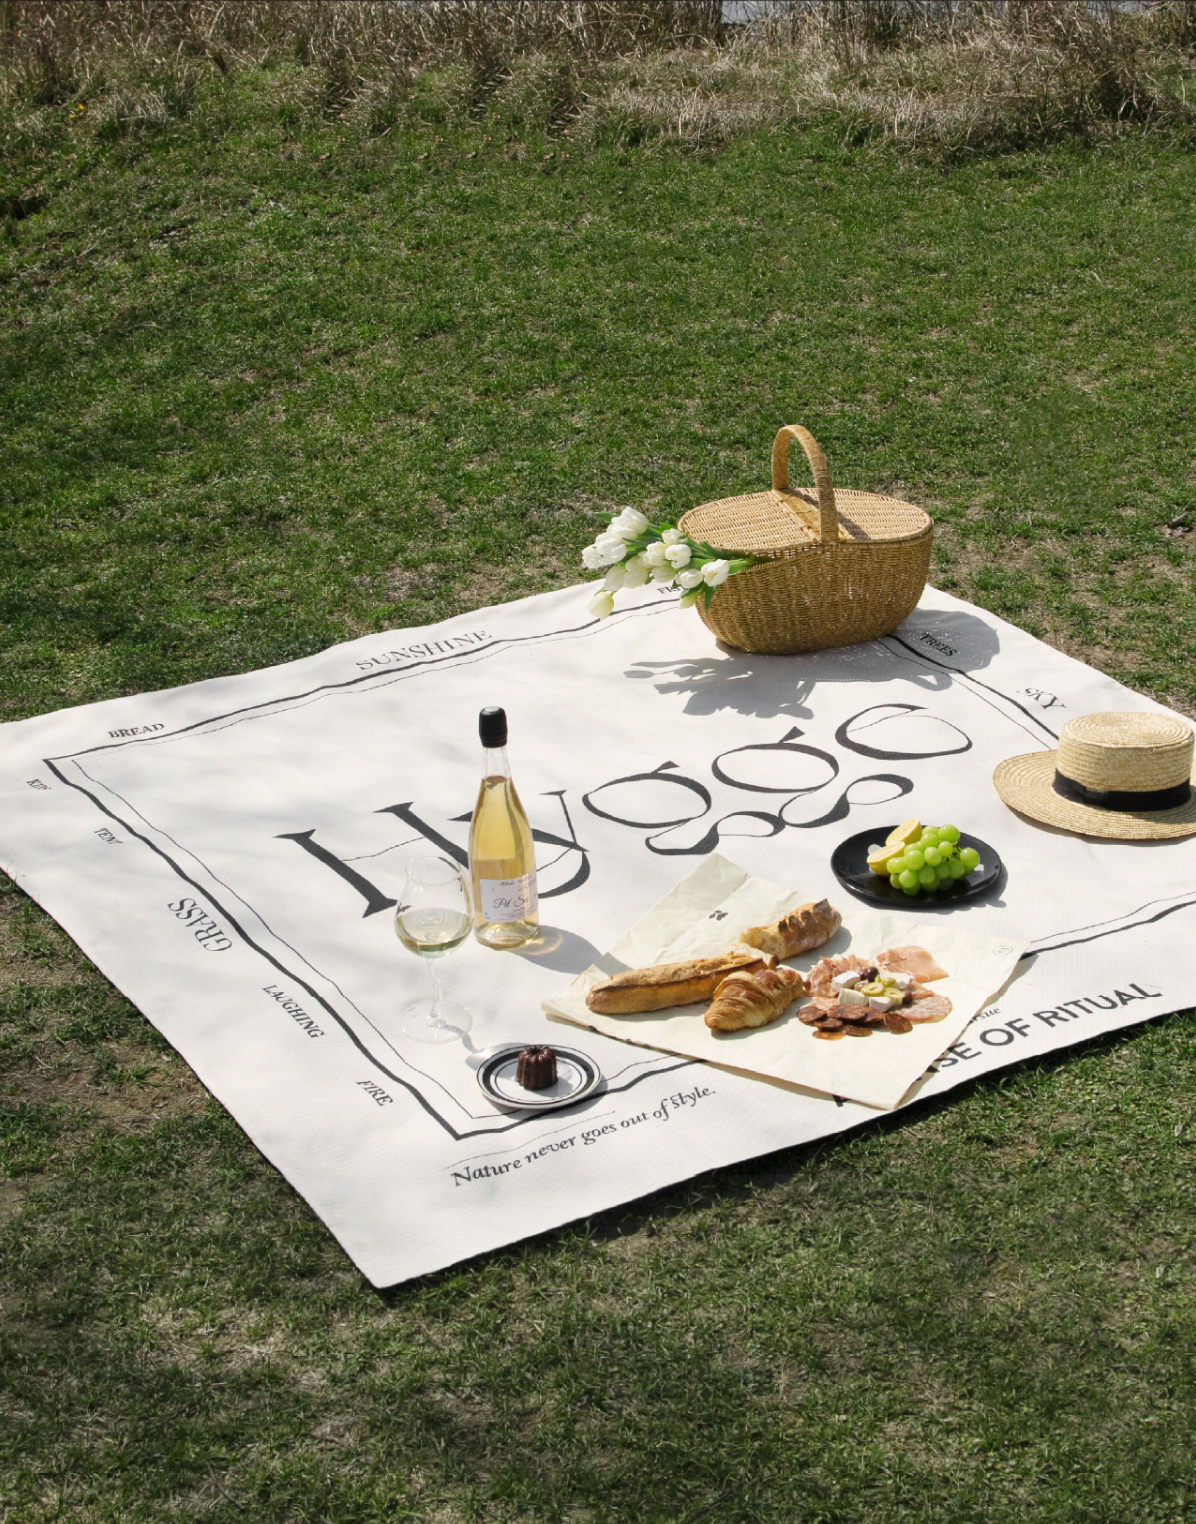 Hygge style simple design cream white ivory waterproof thicken polyester fiber 4~10 people picnic mat easy to fold and storage, by A Bit Sleepy homeware concept store